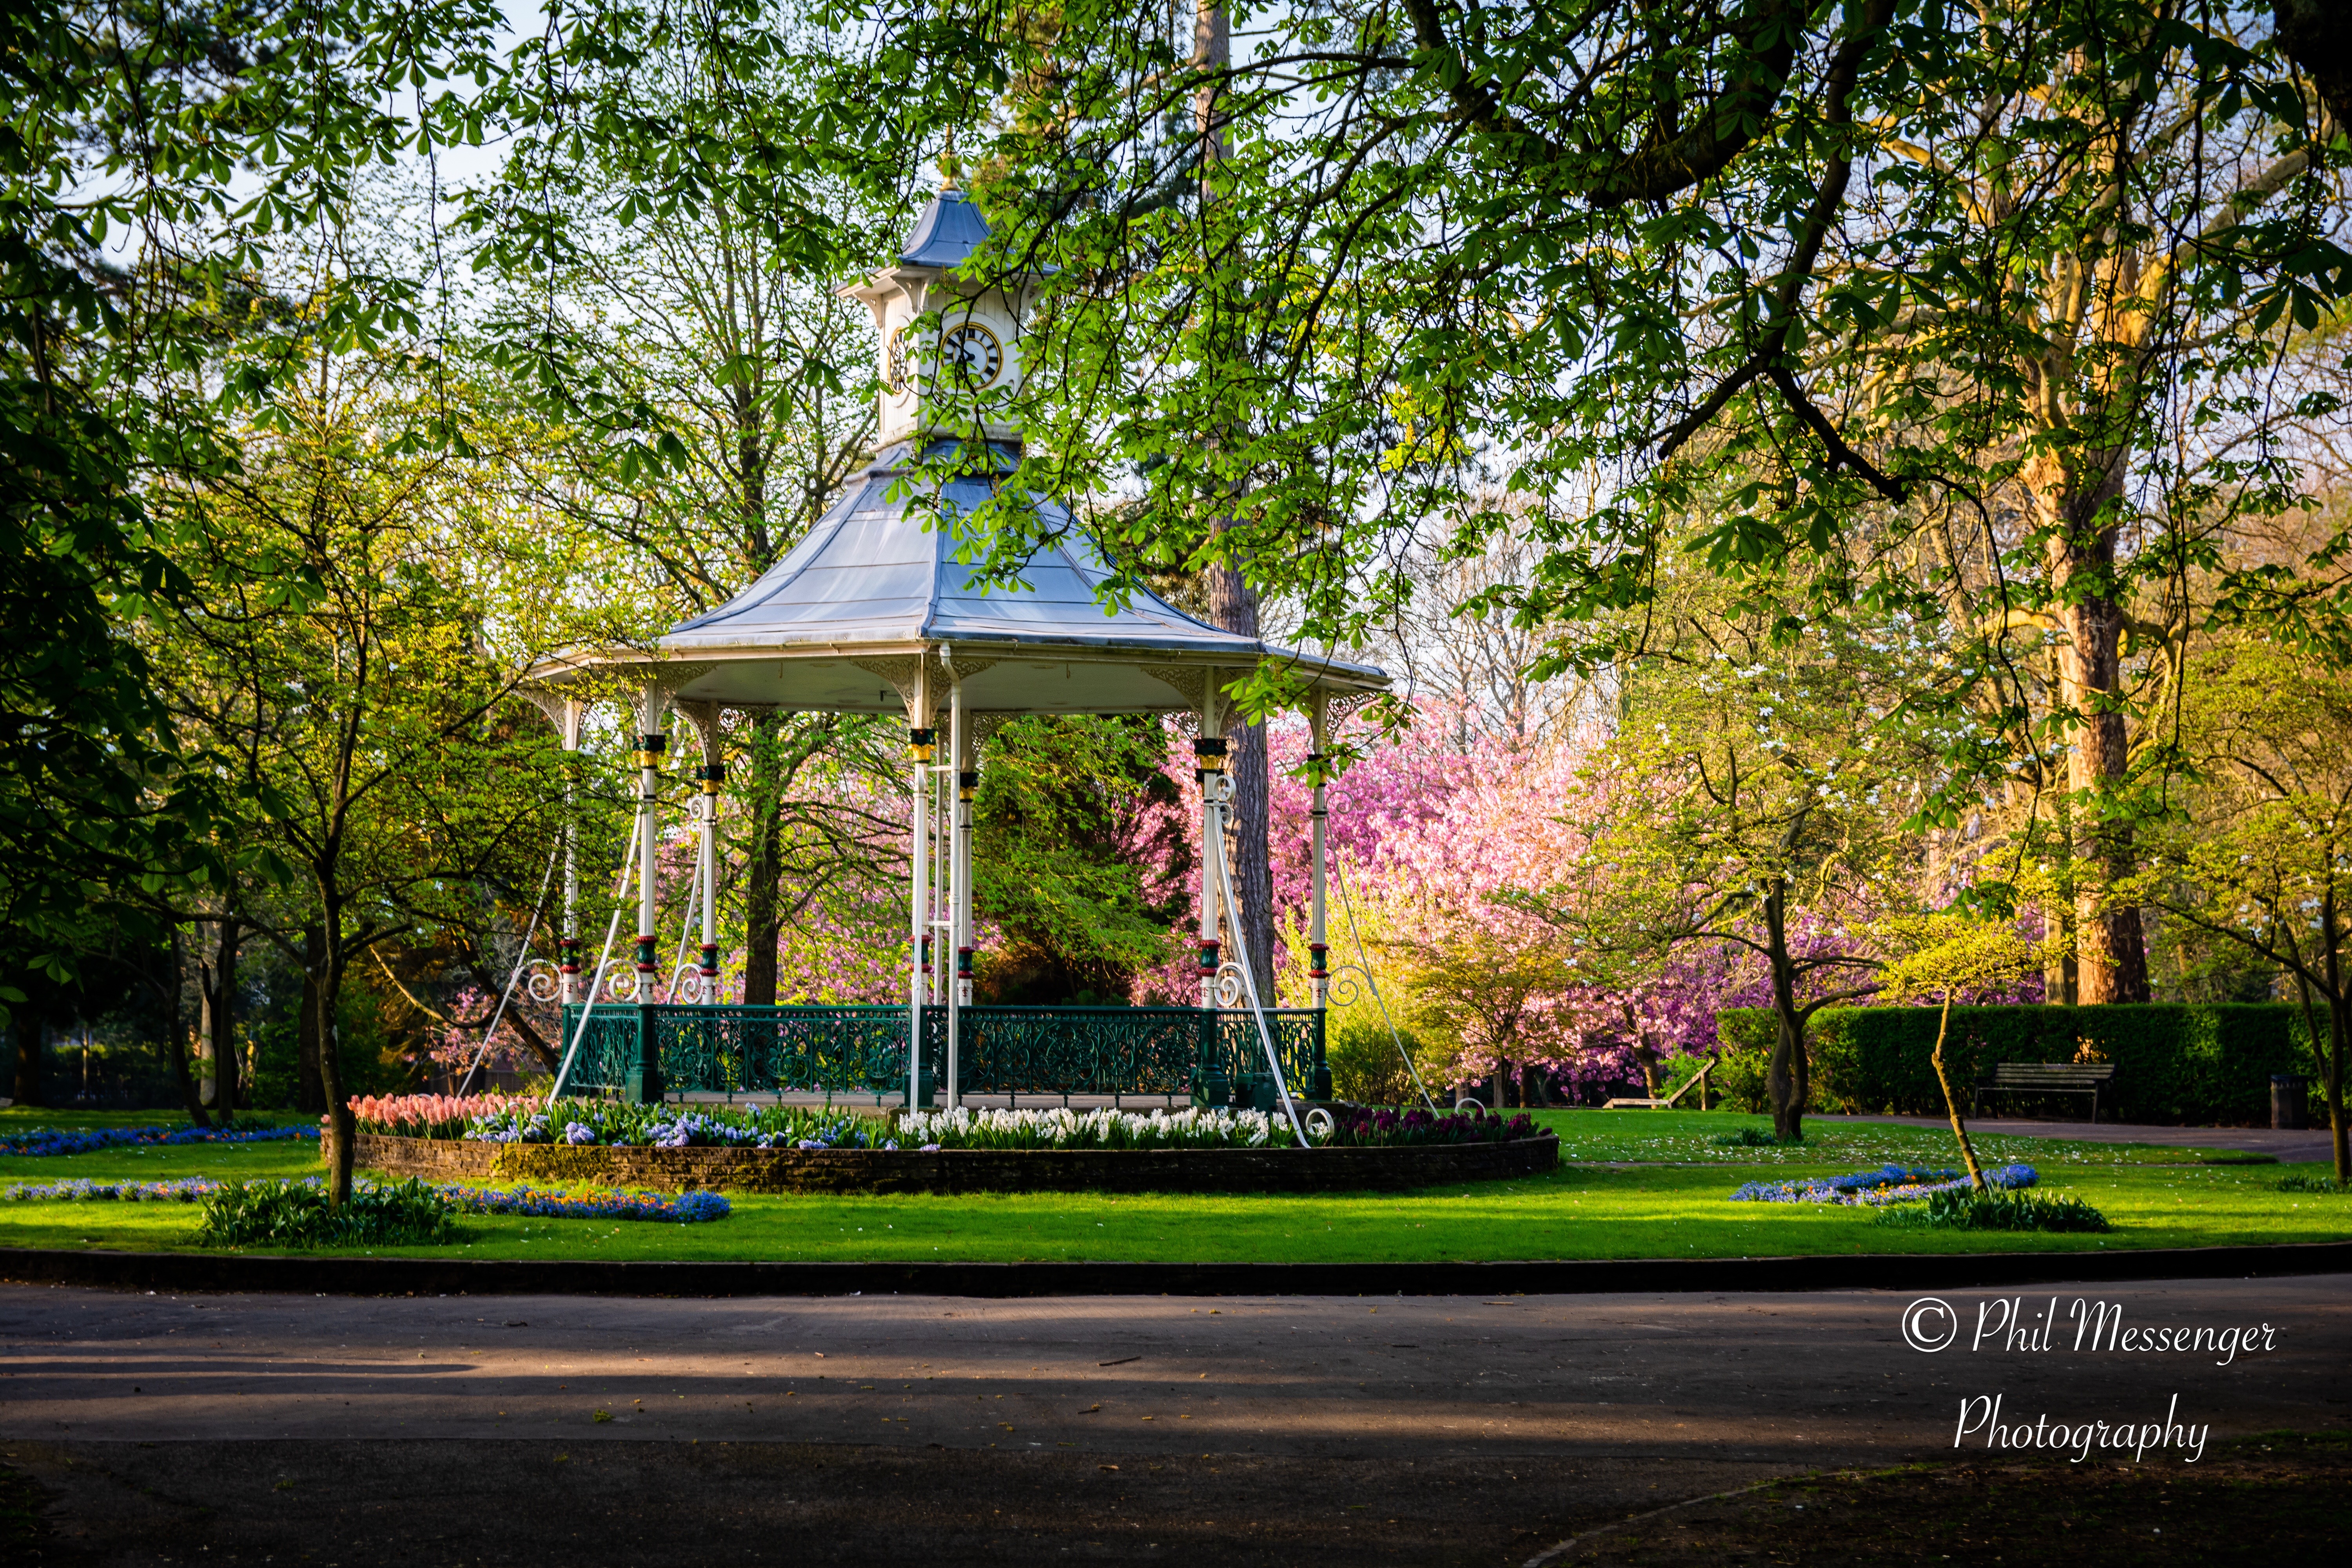 Bandstand on a spring day at the Town Gardens, Swindon.